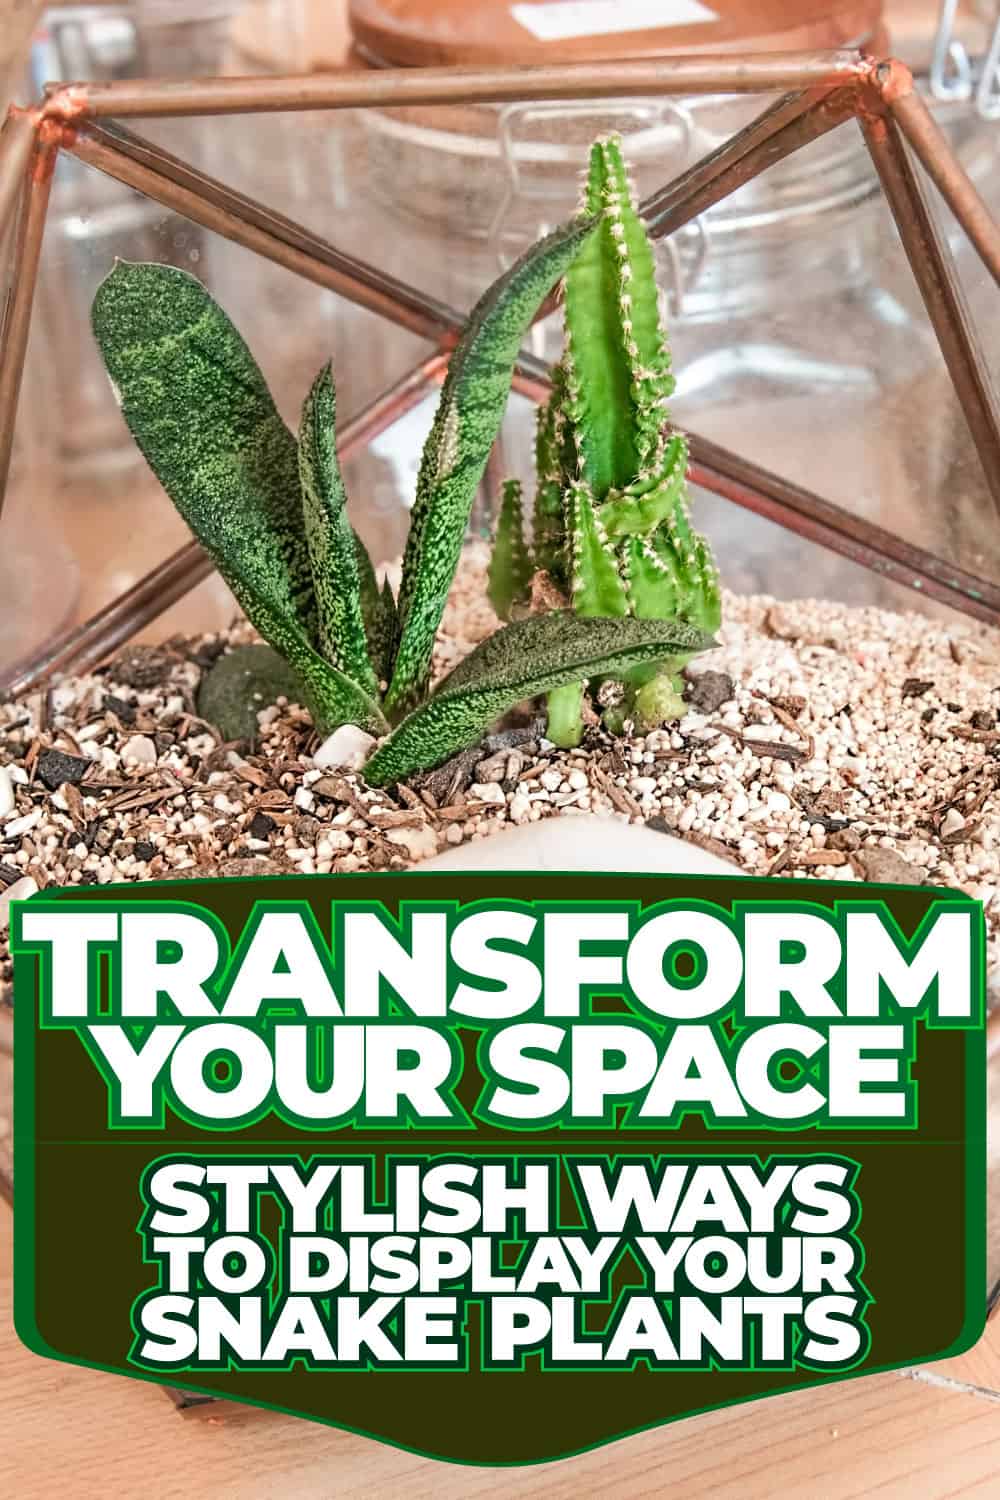 Transform Your Space Stylish Ways To Display Your Snake Plants